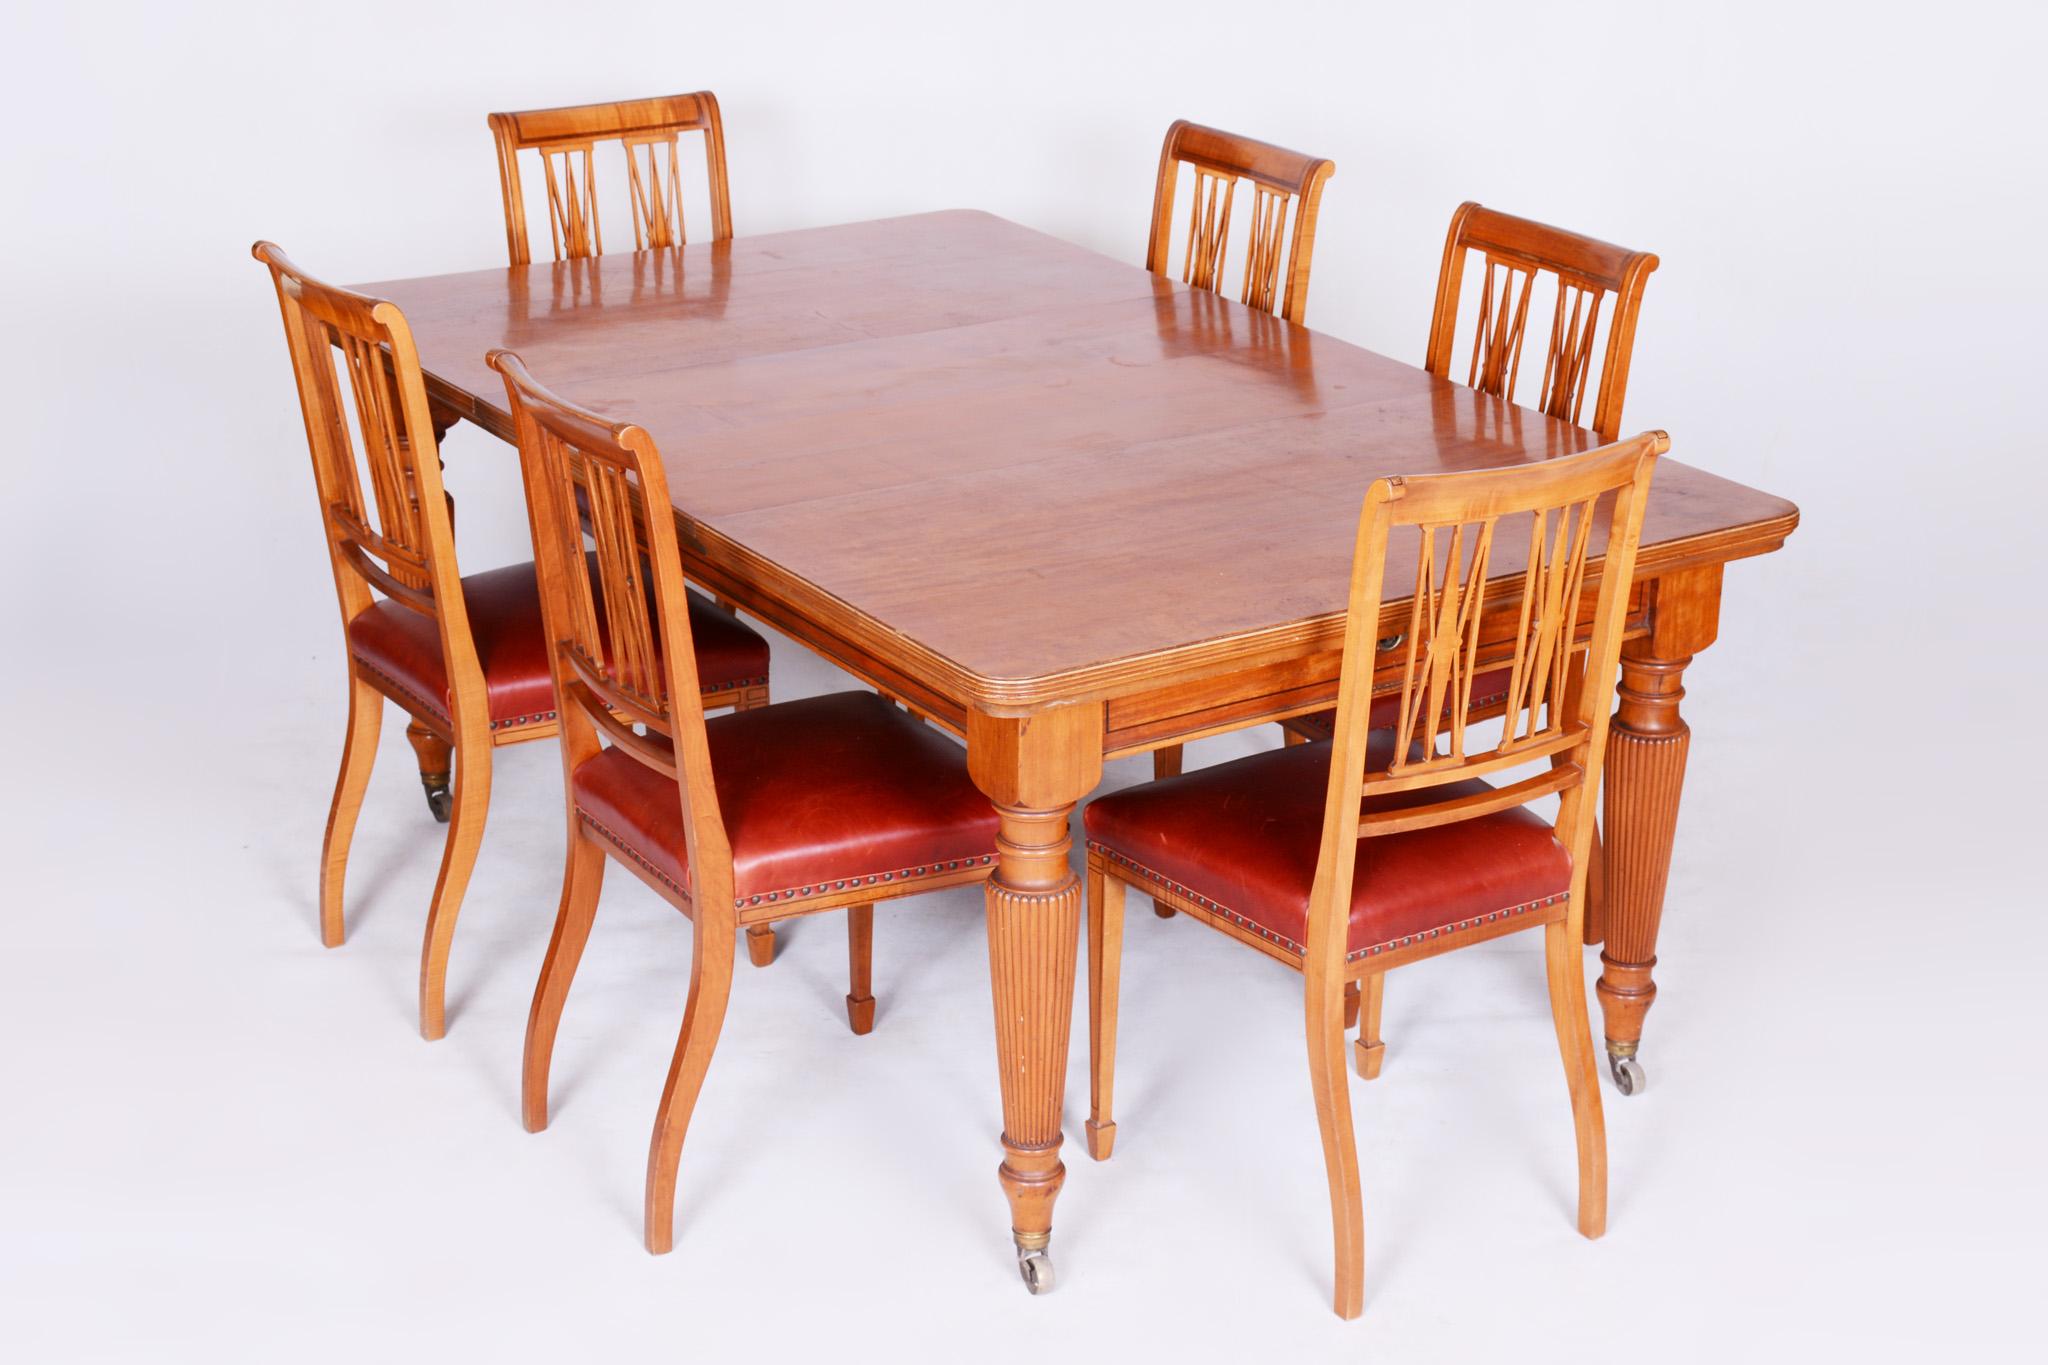 Leather 19th Century Original Rare British Dinning Room Set with 12 Chairs, Satin Wood For Sale